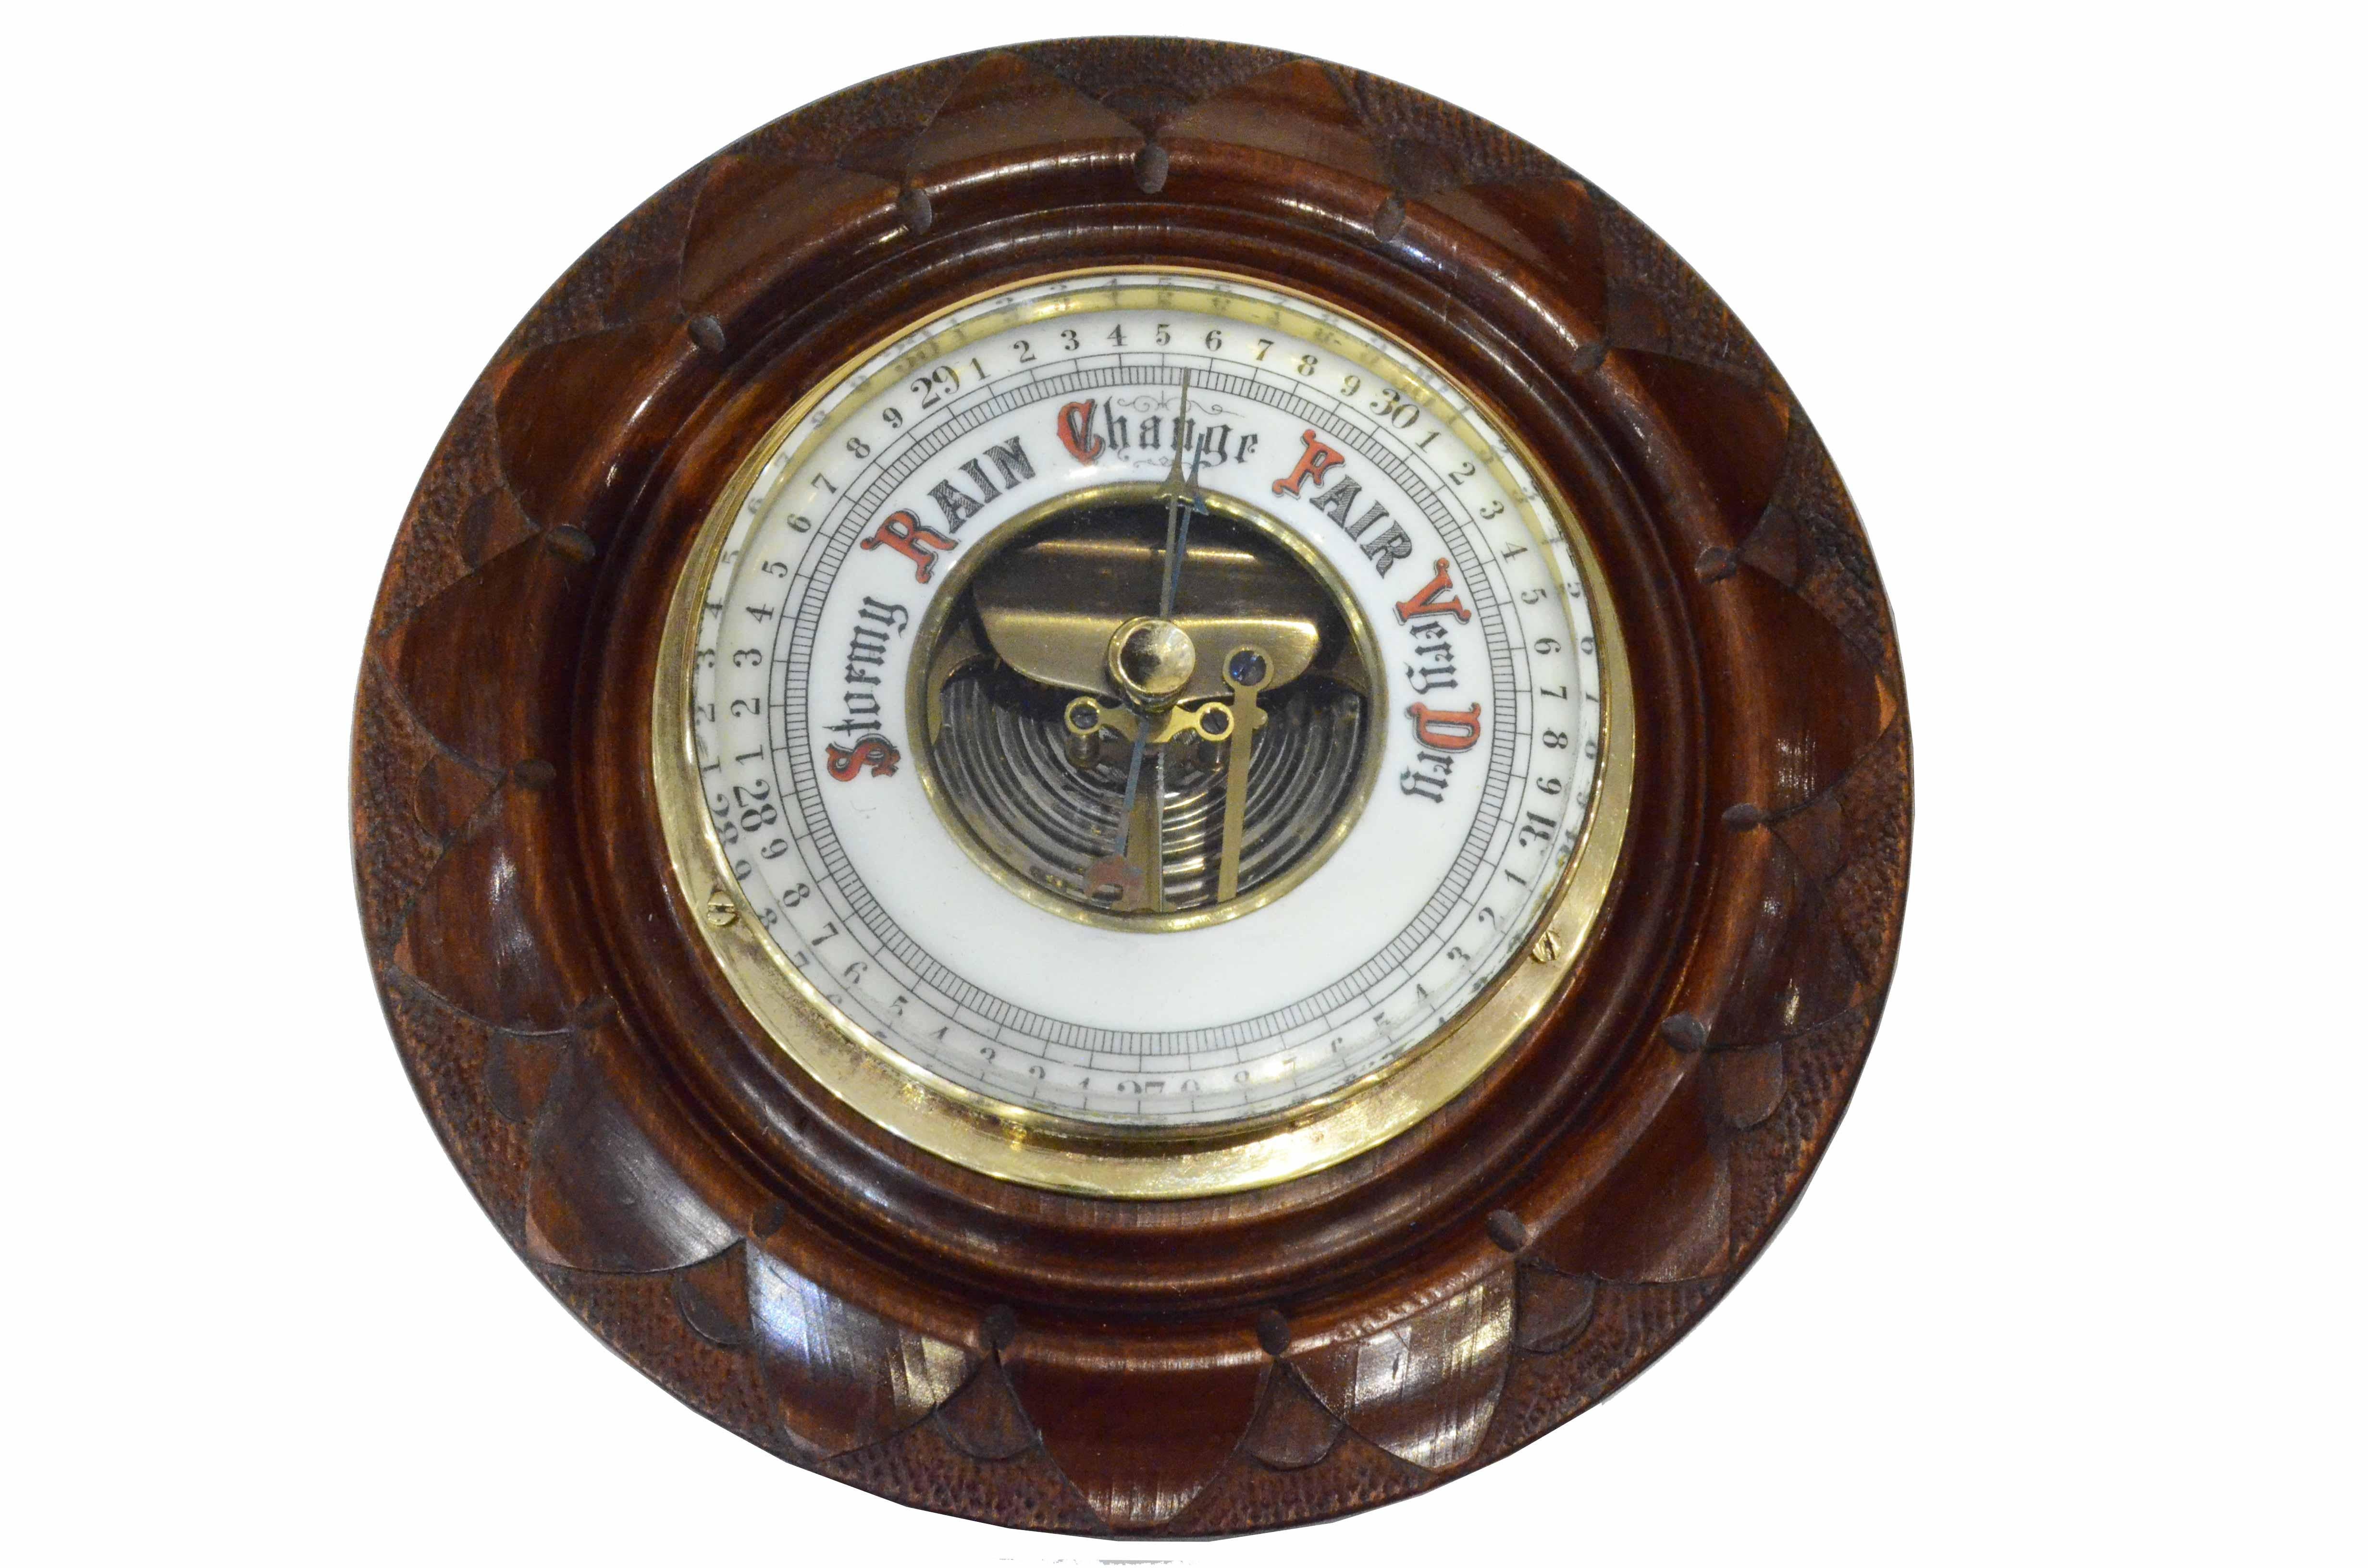 Eaerly 1900s English Carved Woodd Aneroid Barometer Antique Forecast Instrument 6